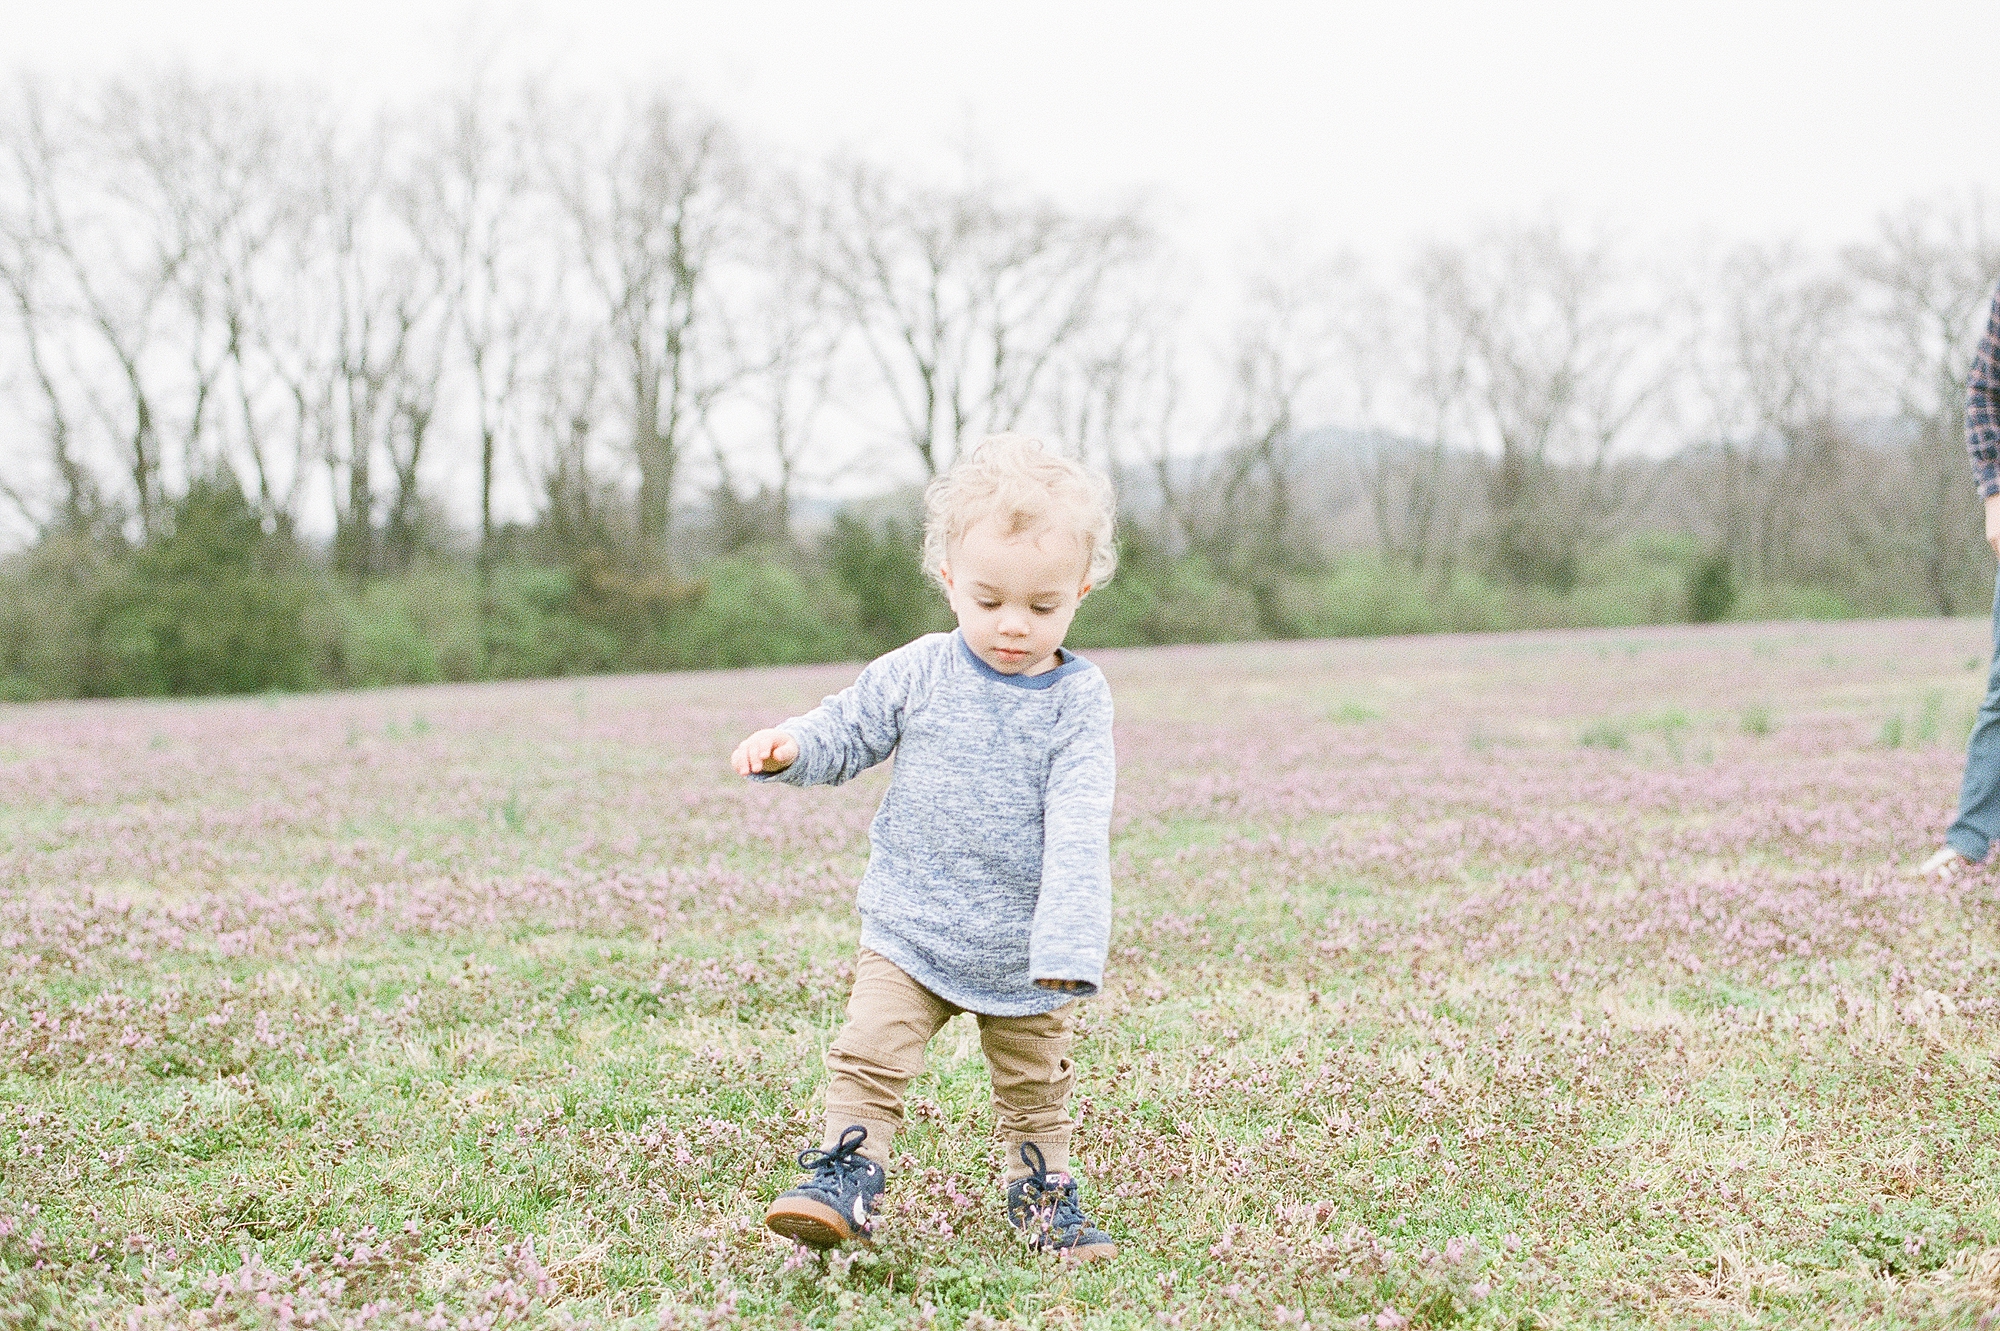 Fuji400h portraits of father and son by Nashville Family Photographer Dolly DeLong Photography